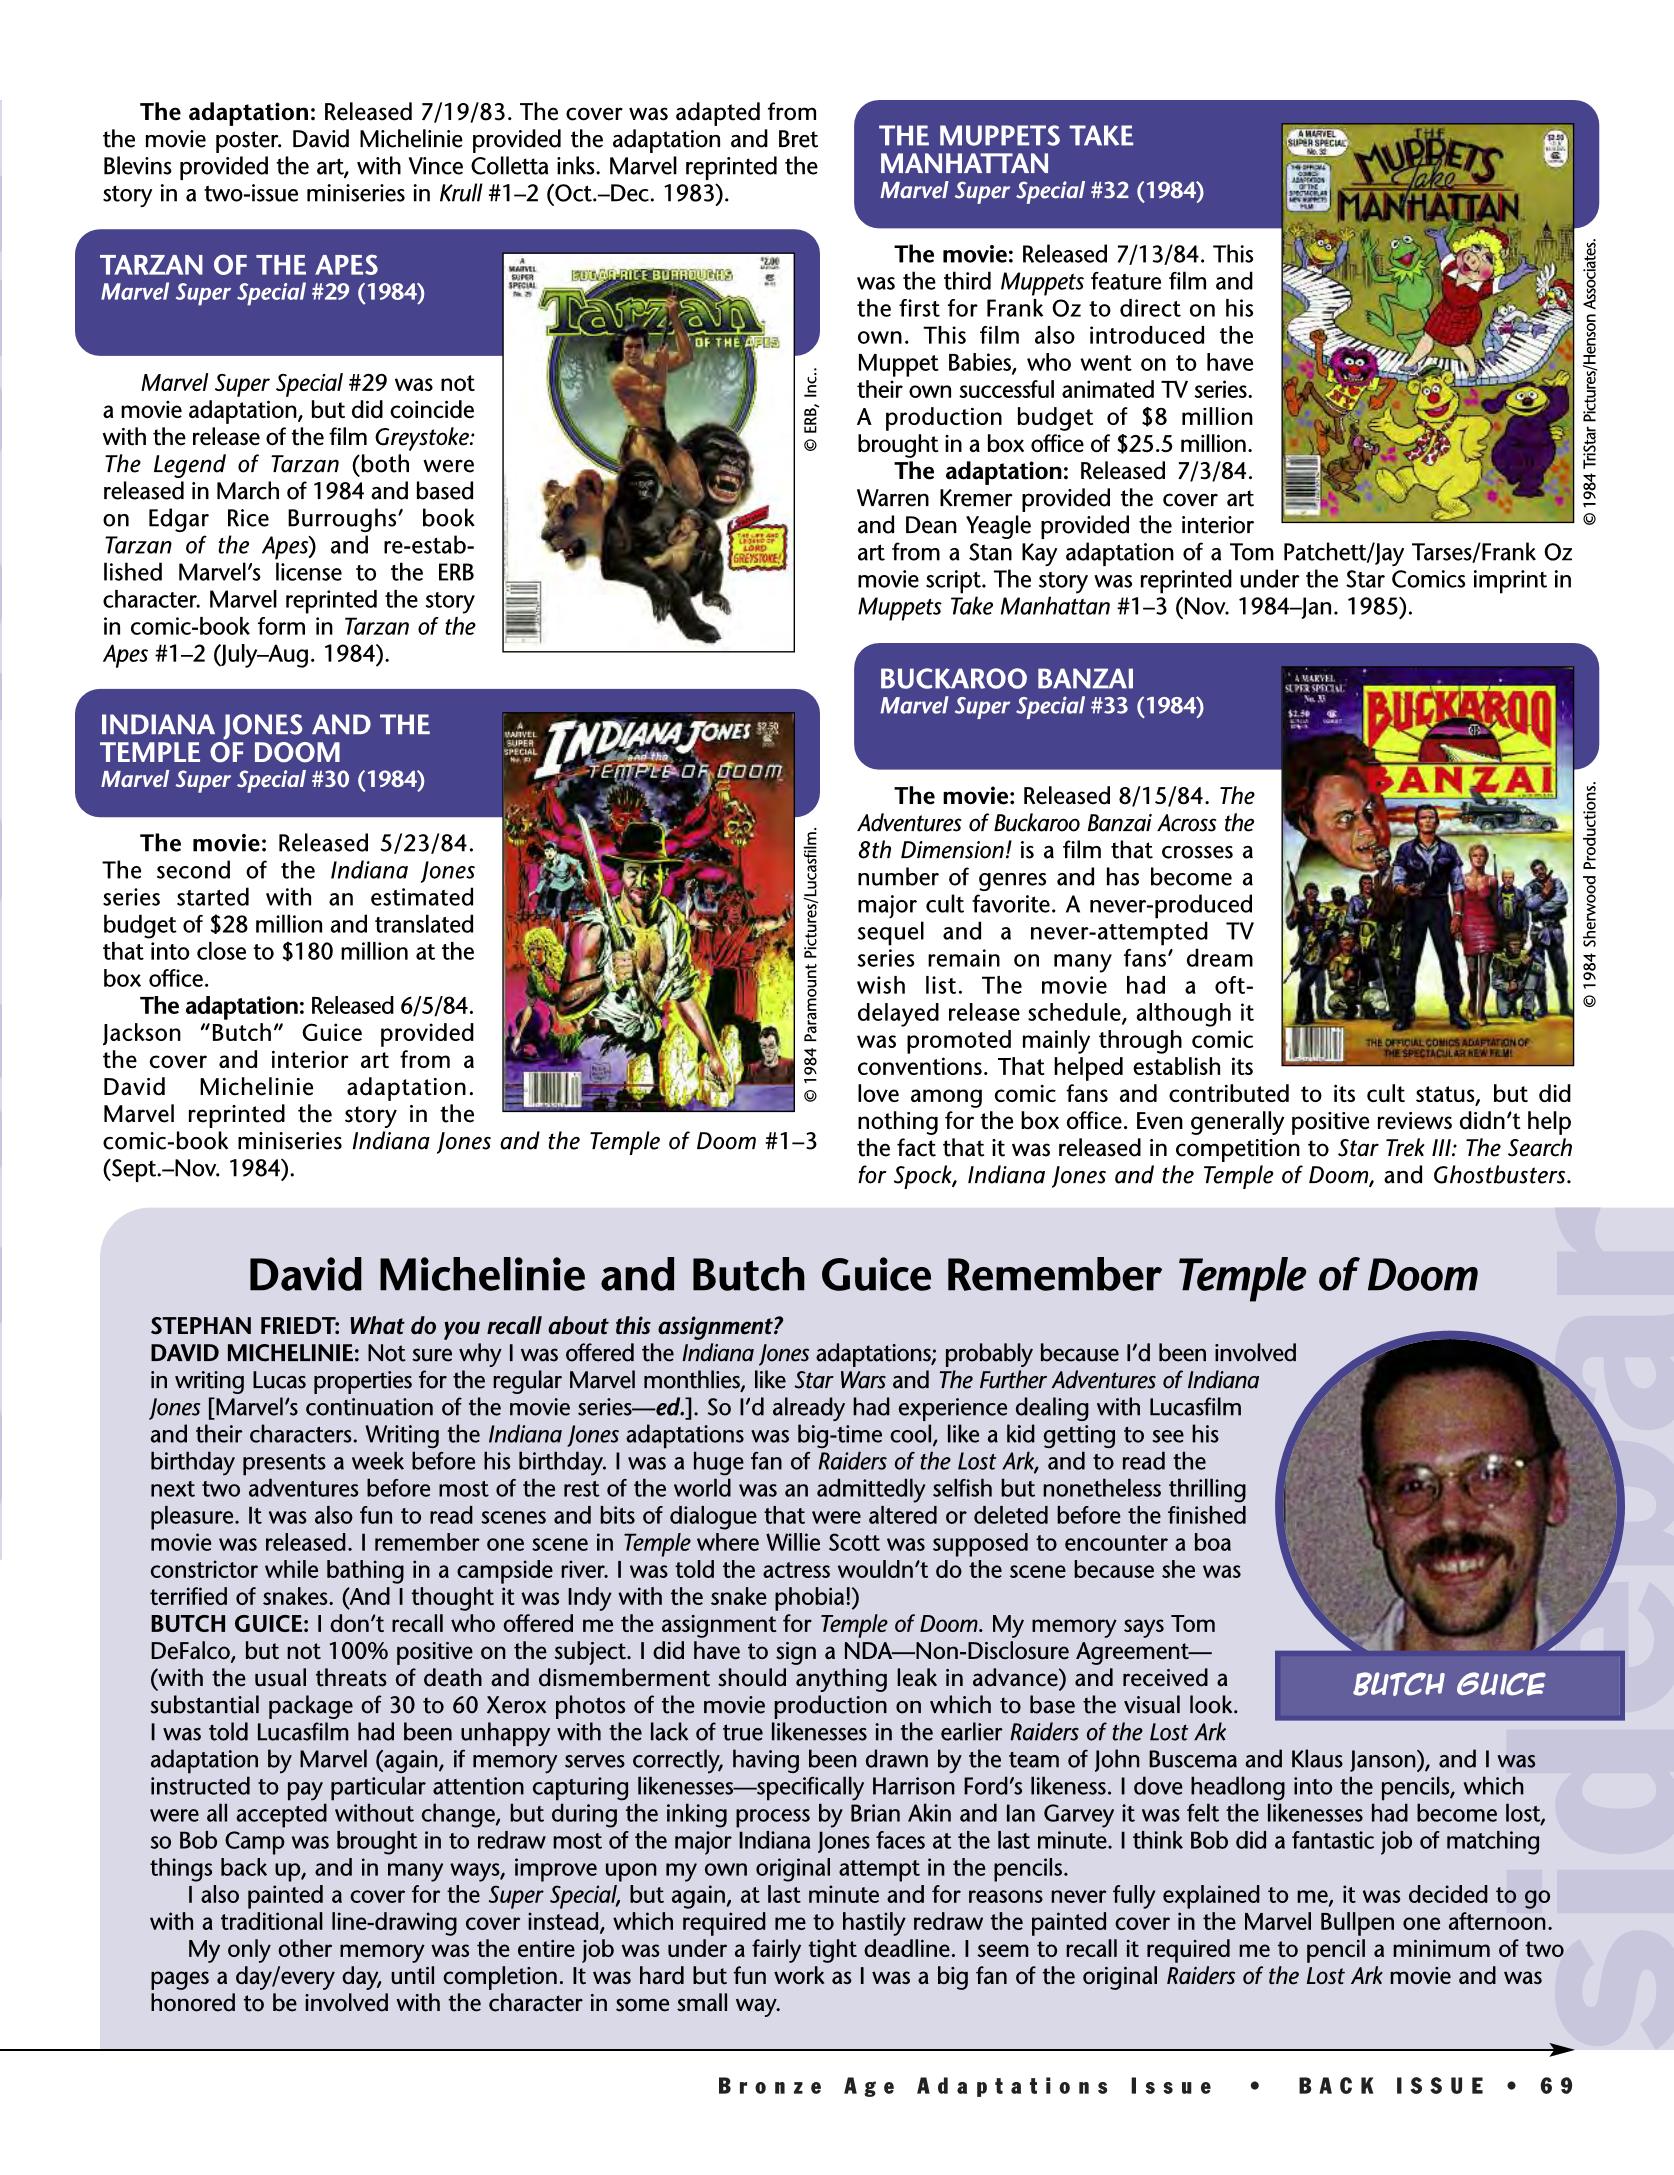 Read online Back Issue comic -  Issue #89 - 69